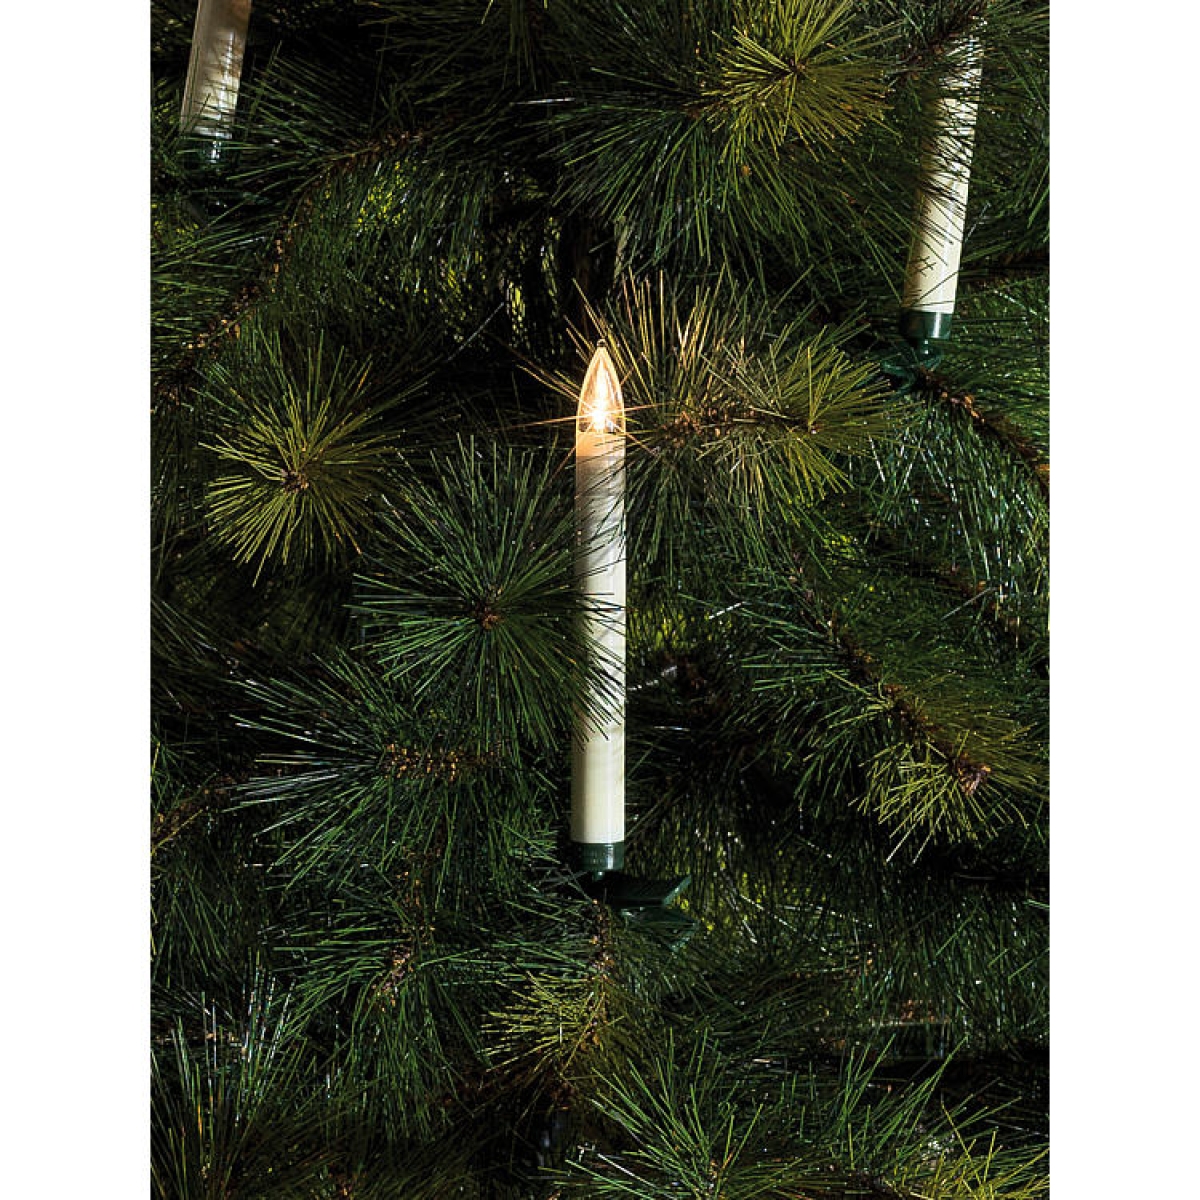 Konstsmide5 wireless white LED candles ww 1935-100 battery operated, outside, additional set for 1930-100Article-No: 840860